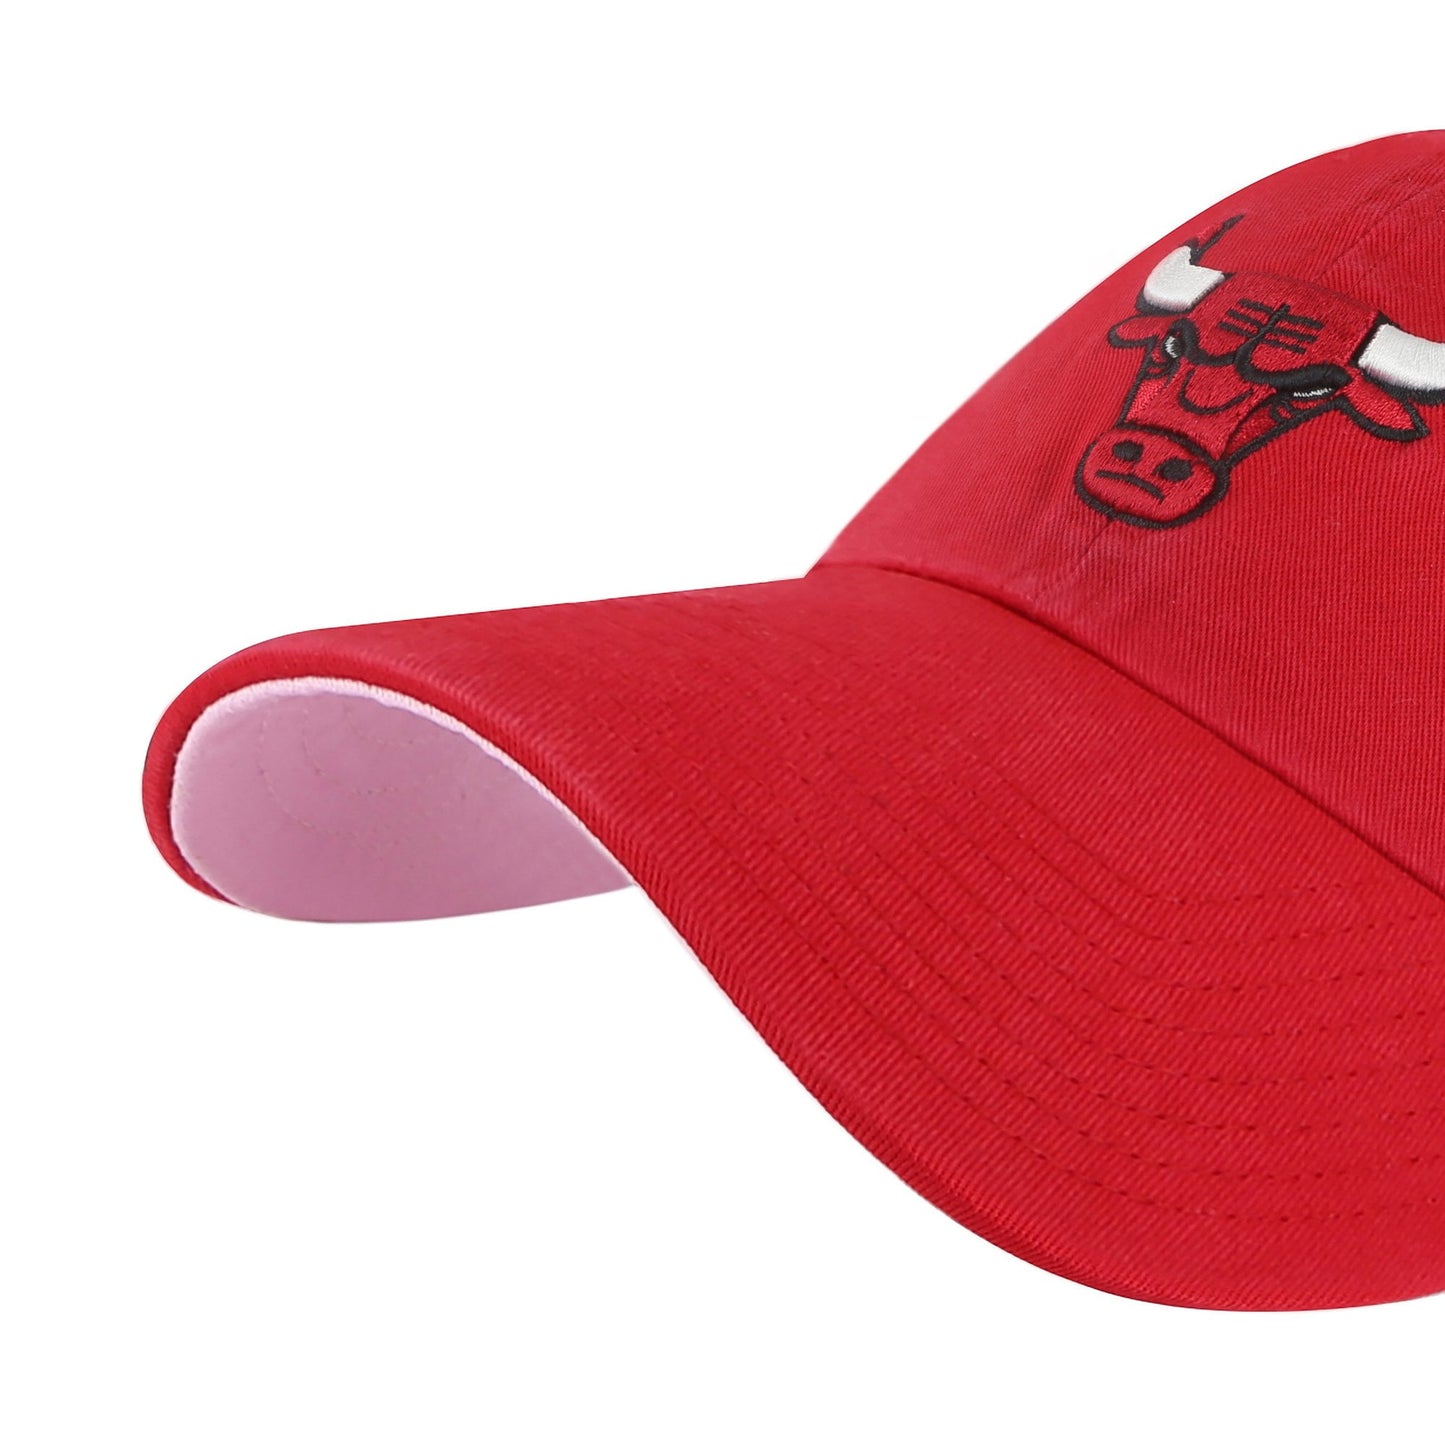 Chicago Bulls Clean Up '47 Brand Fall Finals 6X Champions Double Under Adjustable Hat